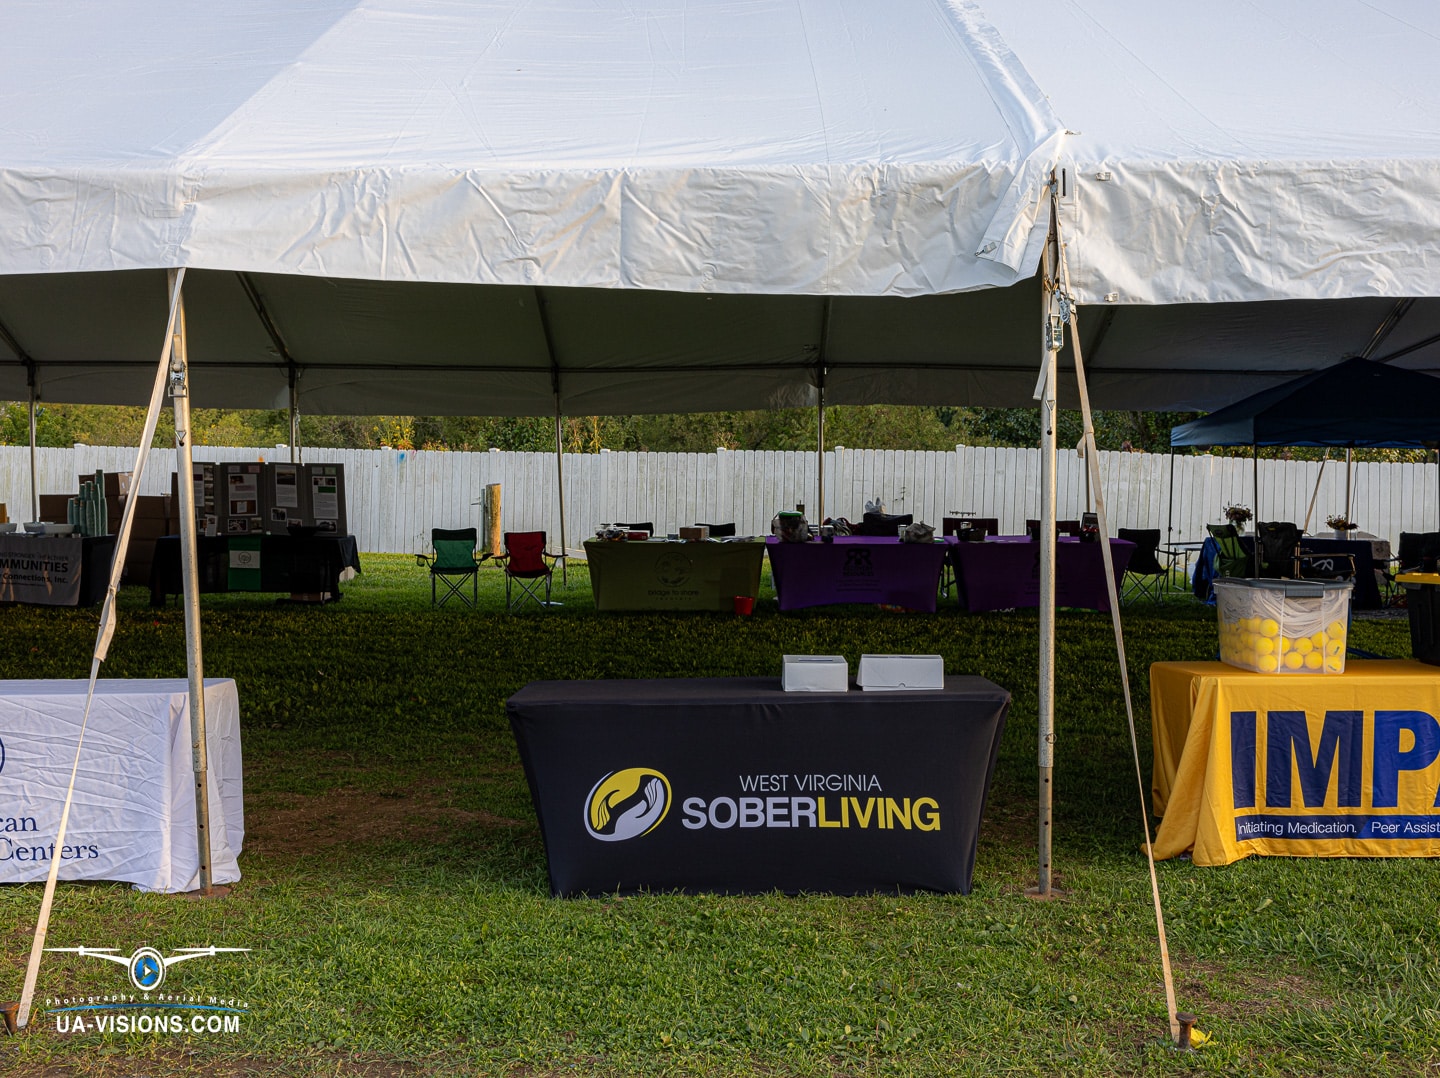 Tent showcasing West Virginia Sober Living at Healing Appalachia, a beacon of support.